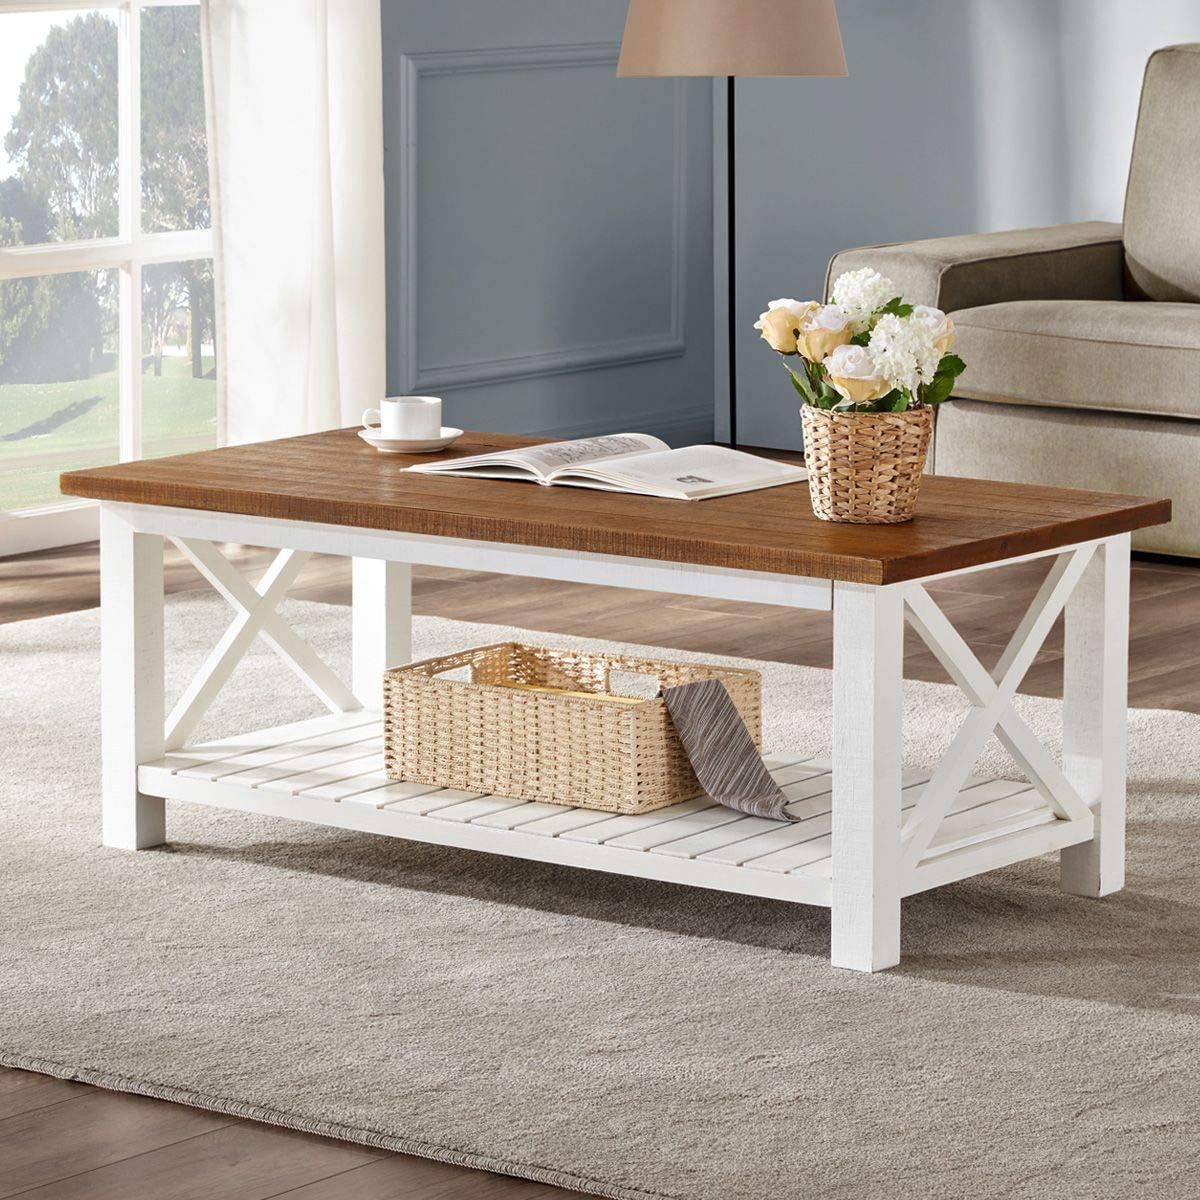 The 10 Best Farmhouse Coffee Tables (for Any Budget) Pertaining To Living Room Farmhouse Coffee Tables (Gallery 1 of 20)